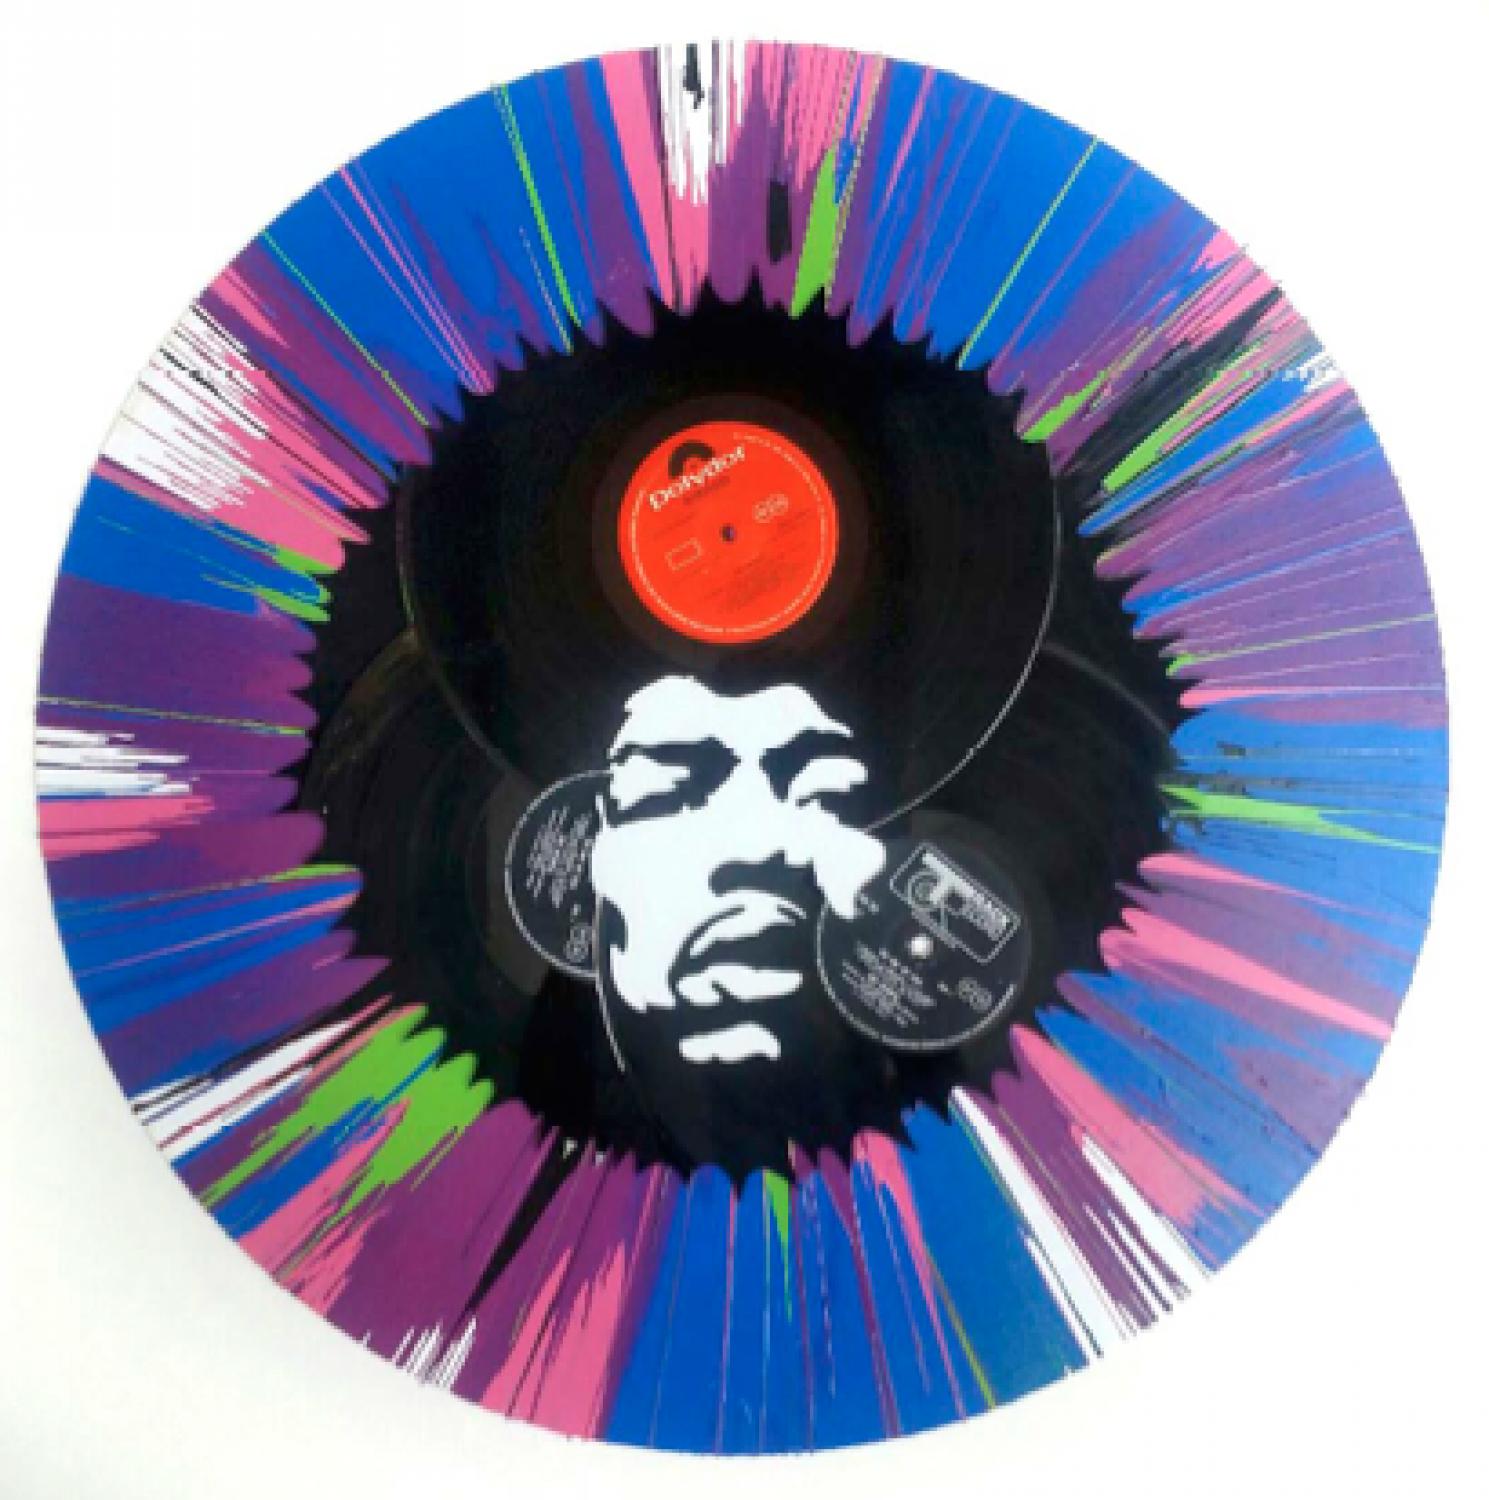 Jimi in a Spin